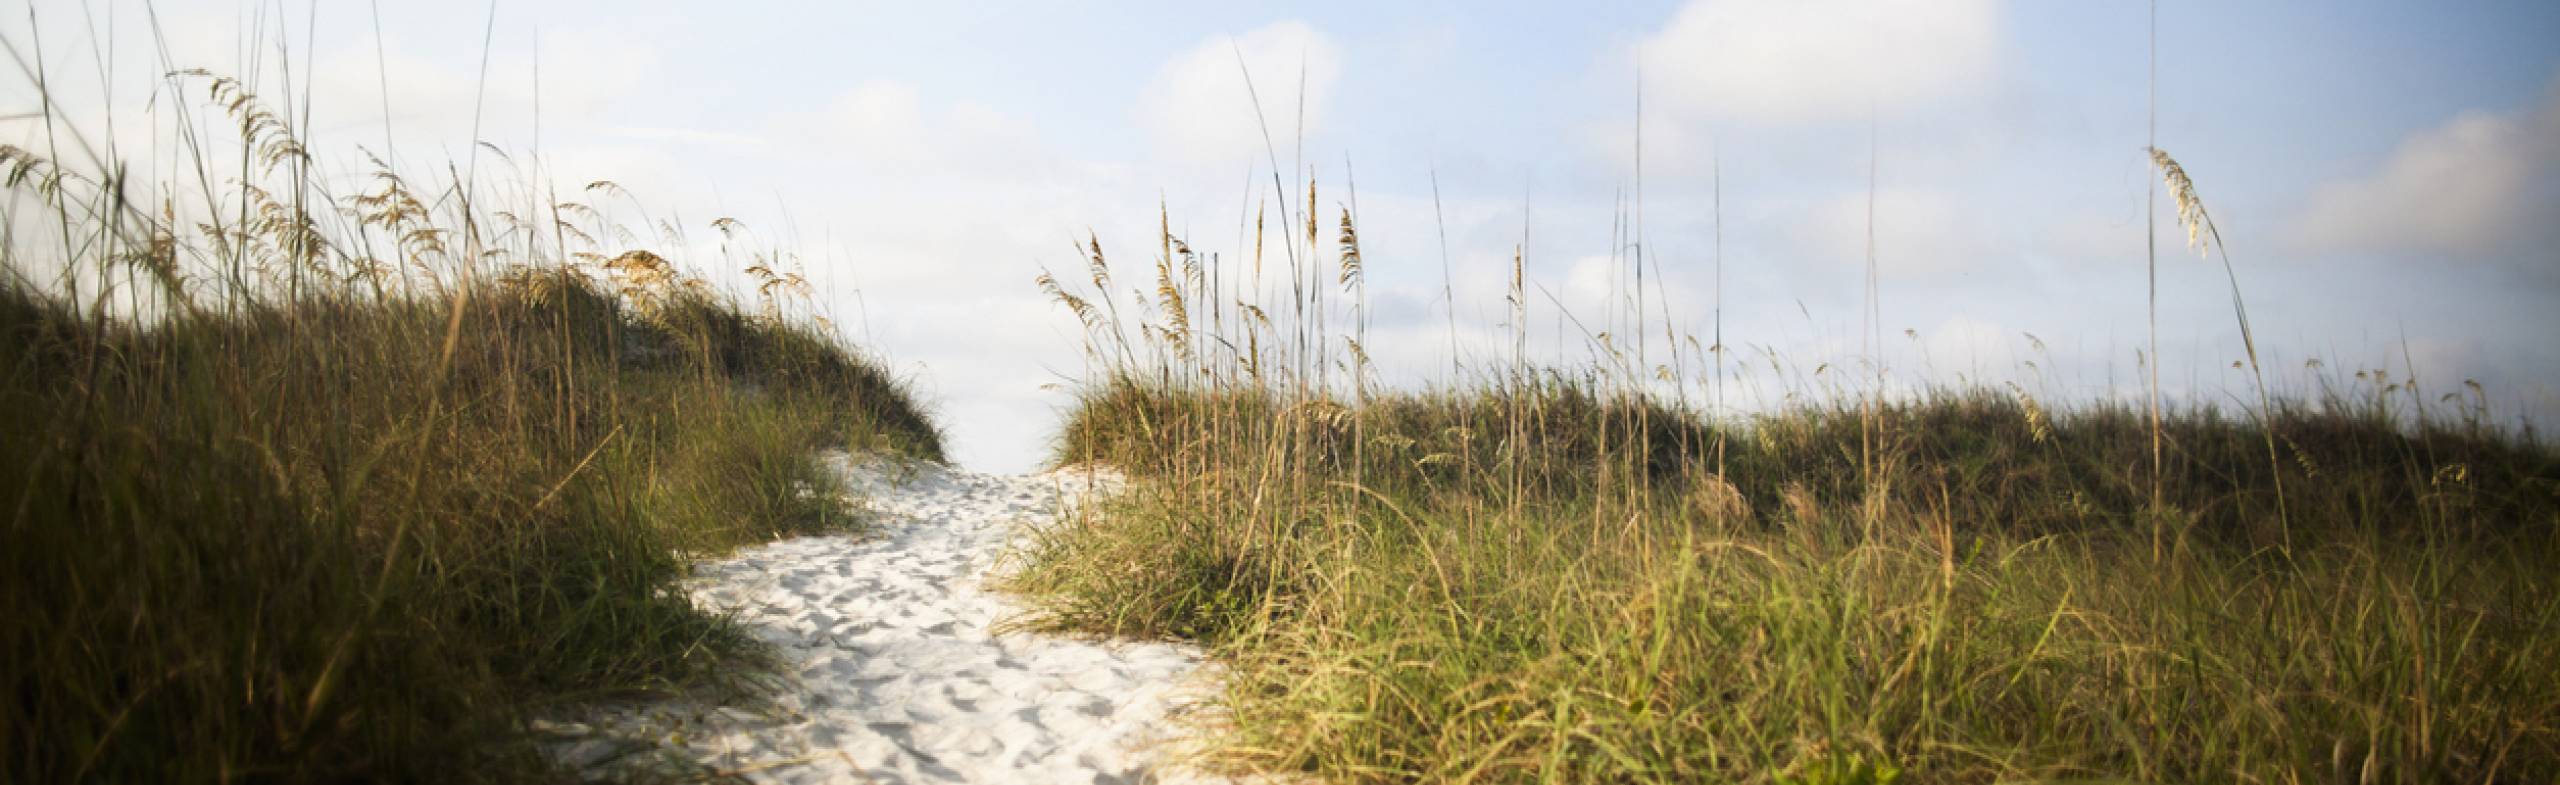 TOP 5 REASONS WHY HILTON HEAD ISLAND IS THE ISLAND TO INVEST IN. Blog Post